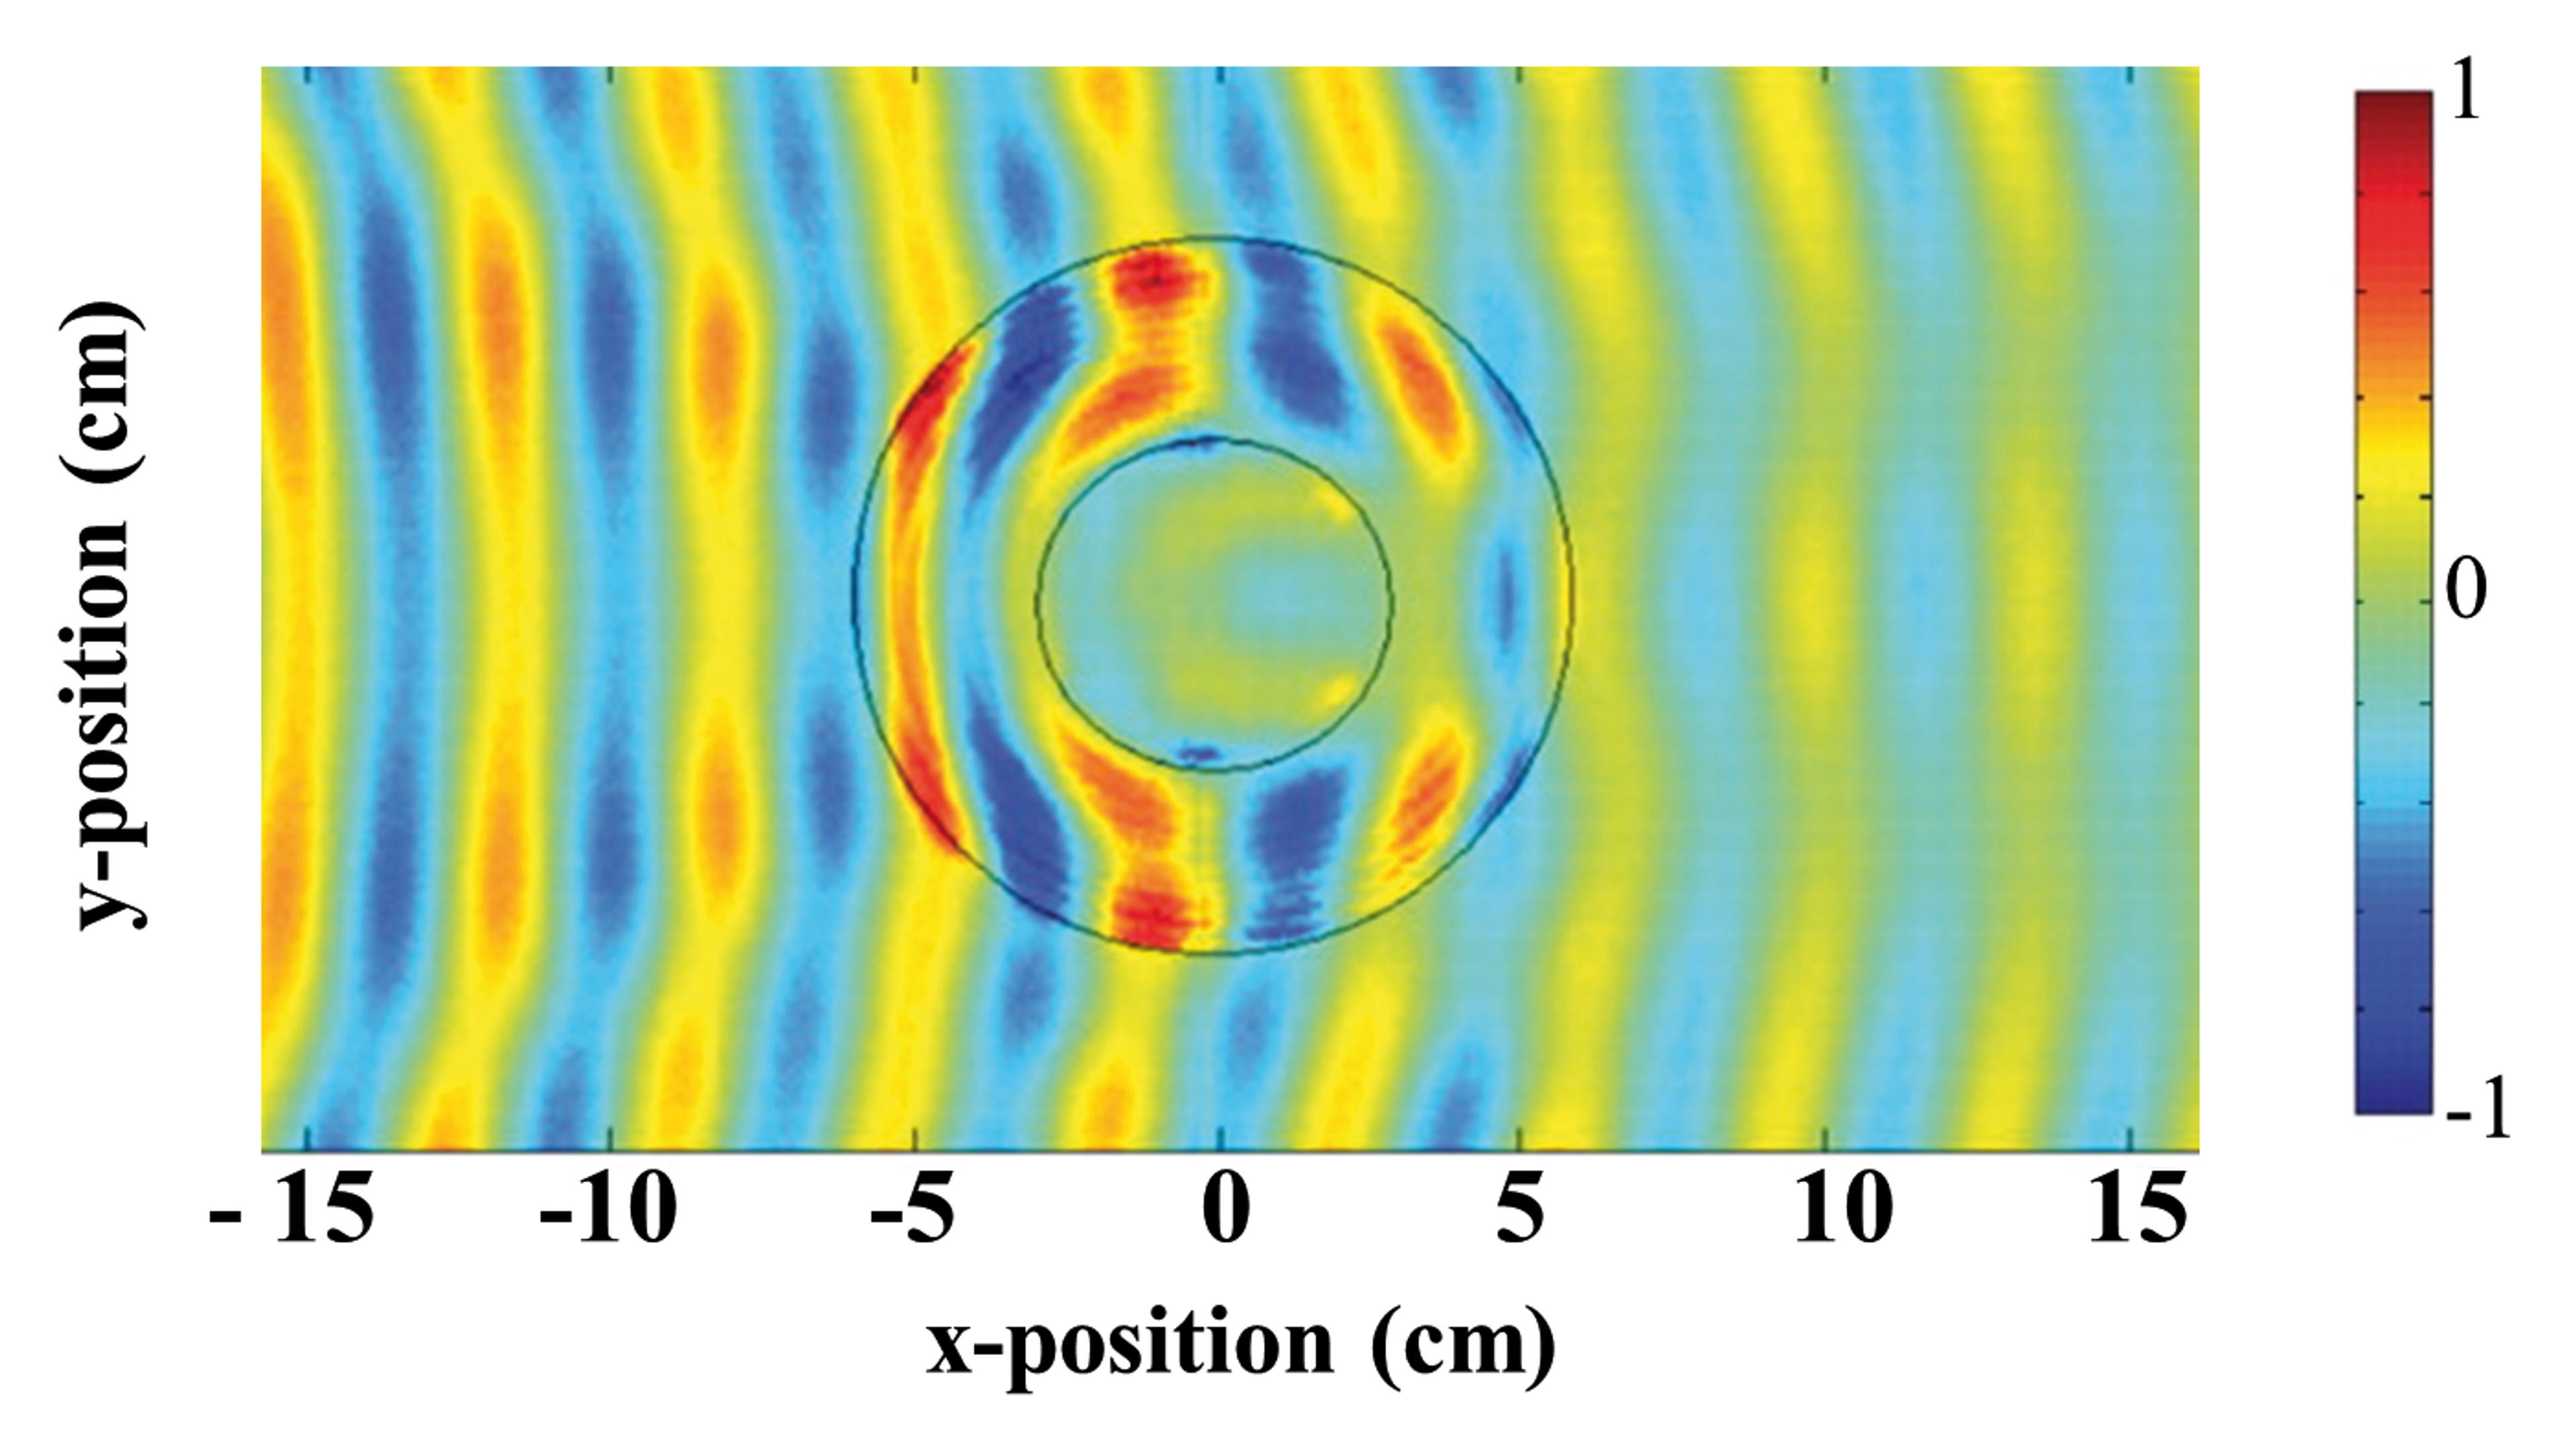 Electric field patterns of microwave radiation with a frequency of 8.5 GHz as it propagates through a metamaterial cloak